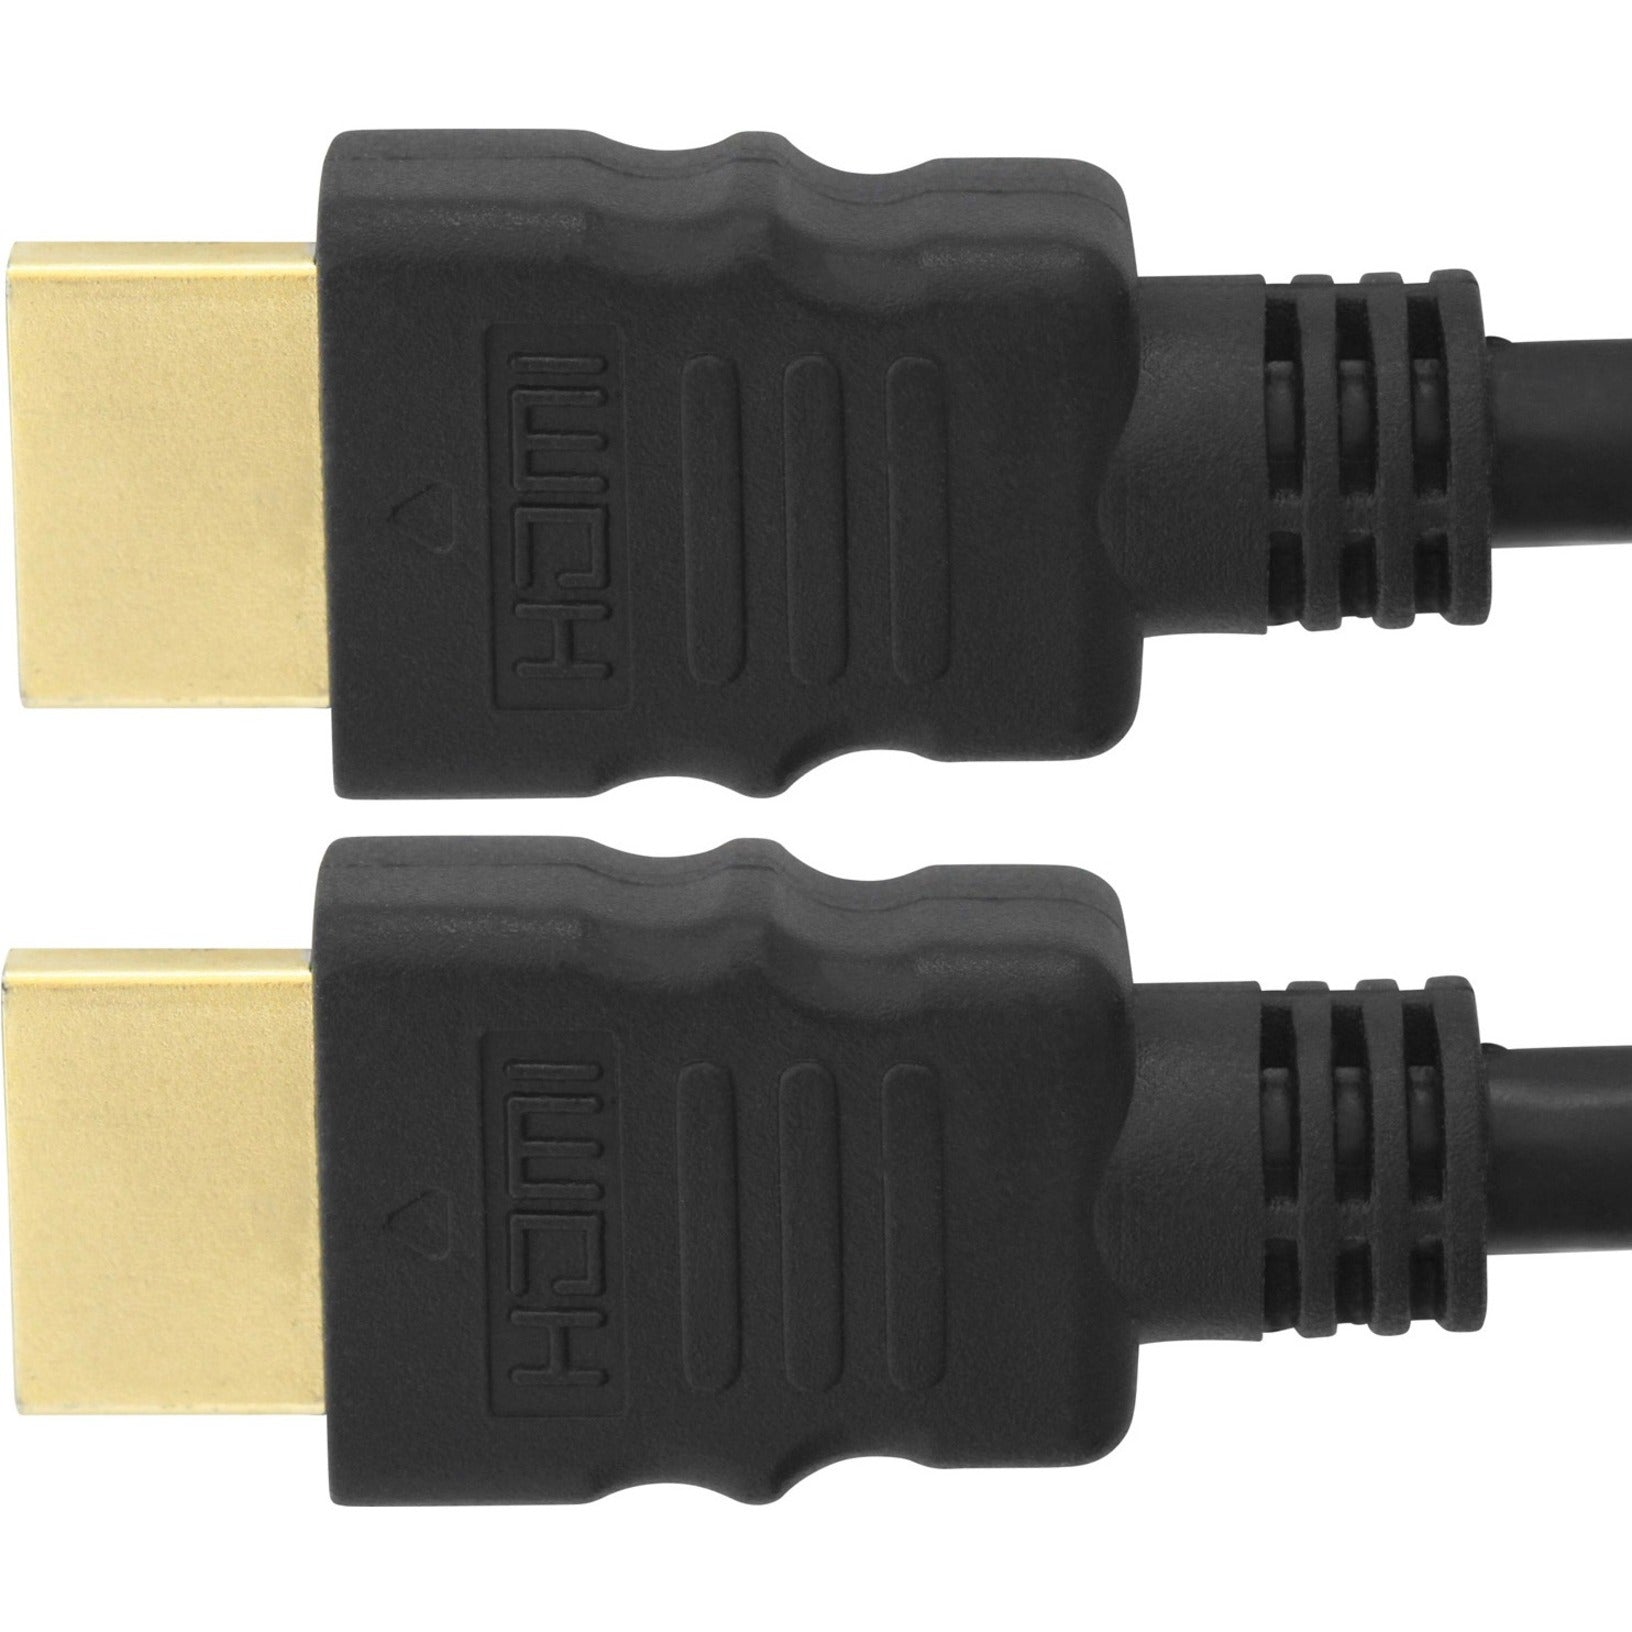 4XEM 4XHDMIMM15FT 15ft 5m High Speed HDMI Cable, 1080p 3D, Ethernet, Audio Return Channel